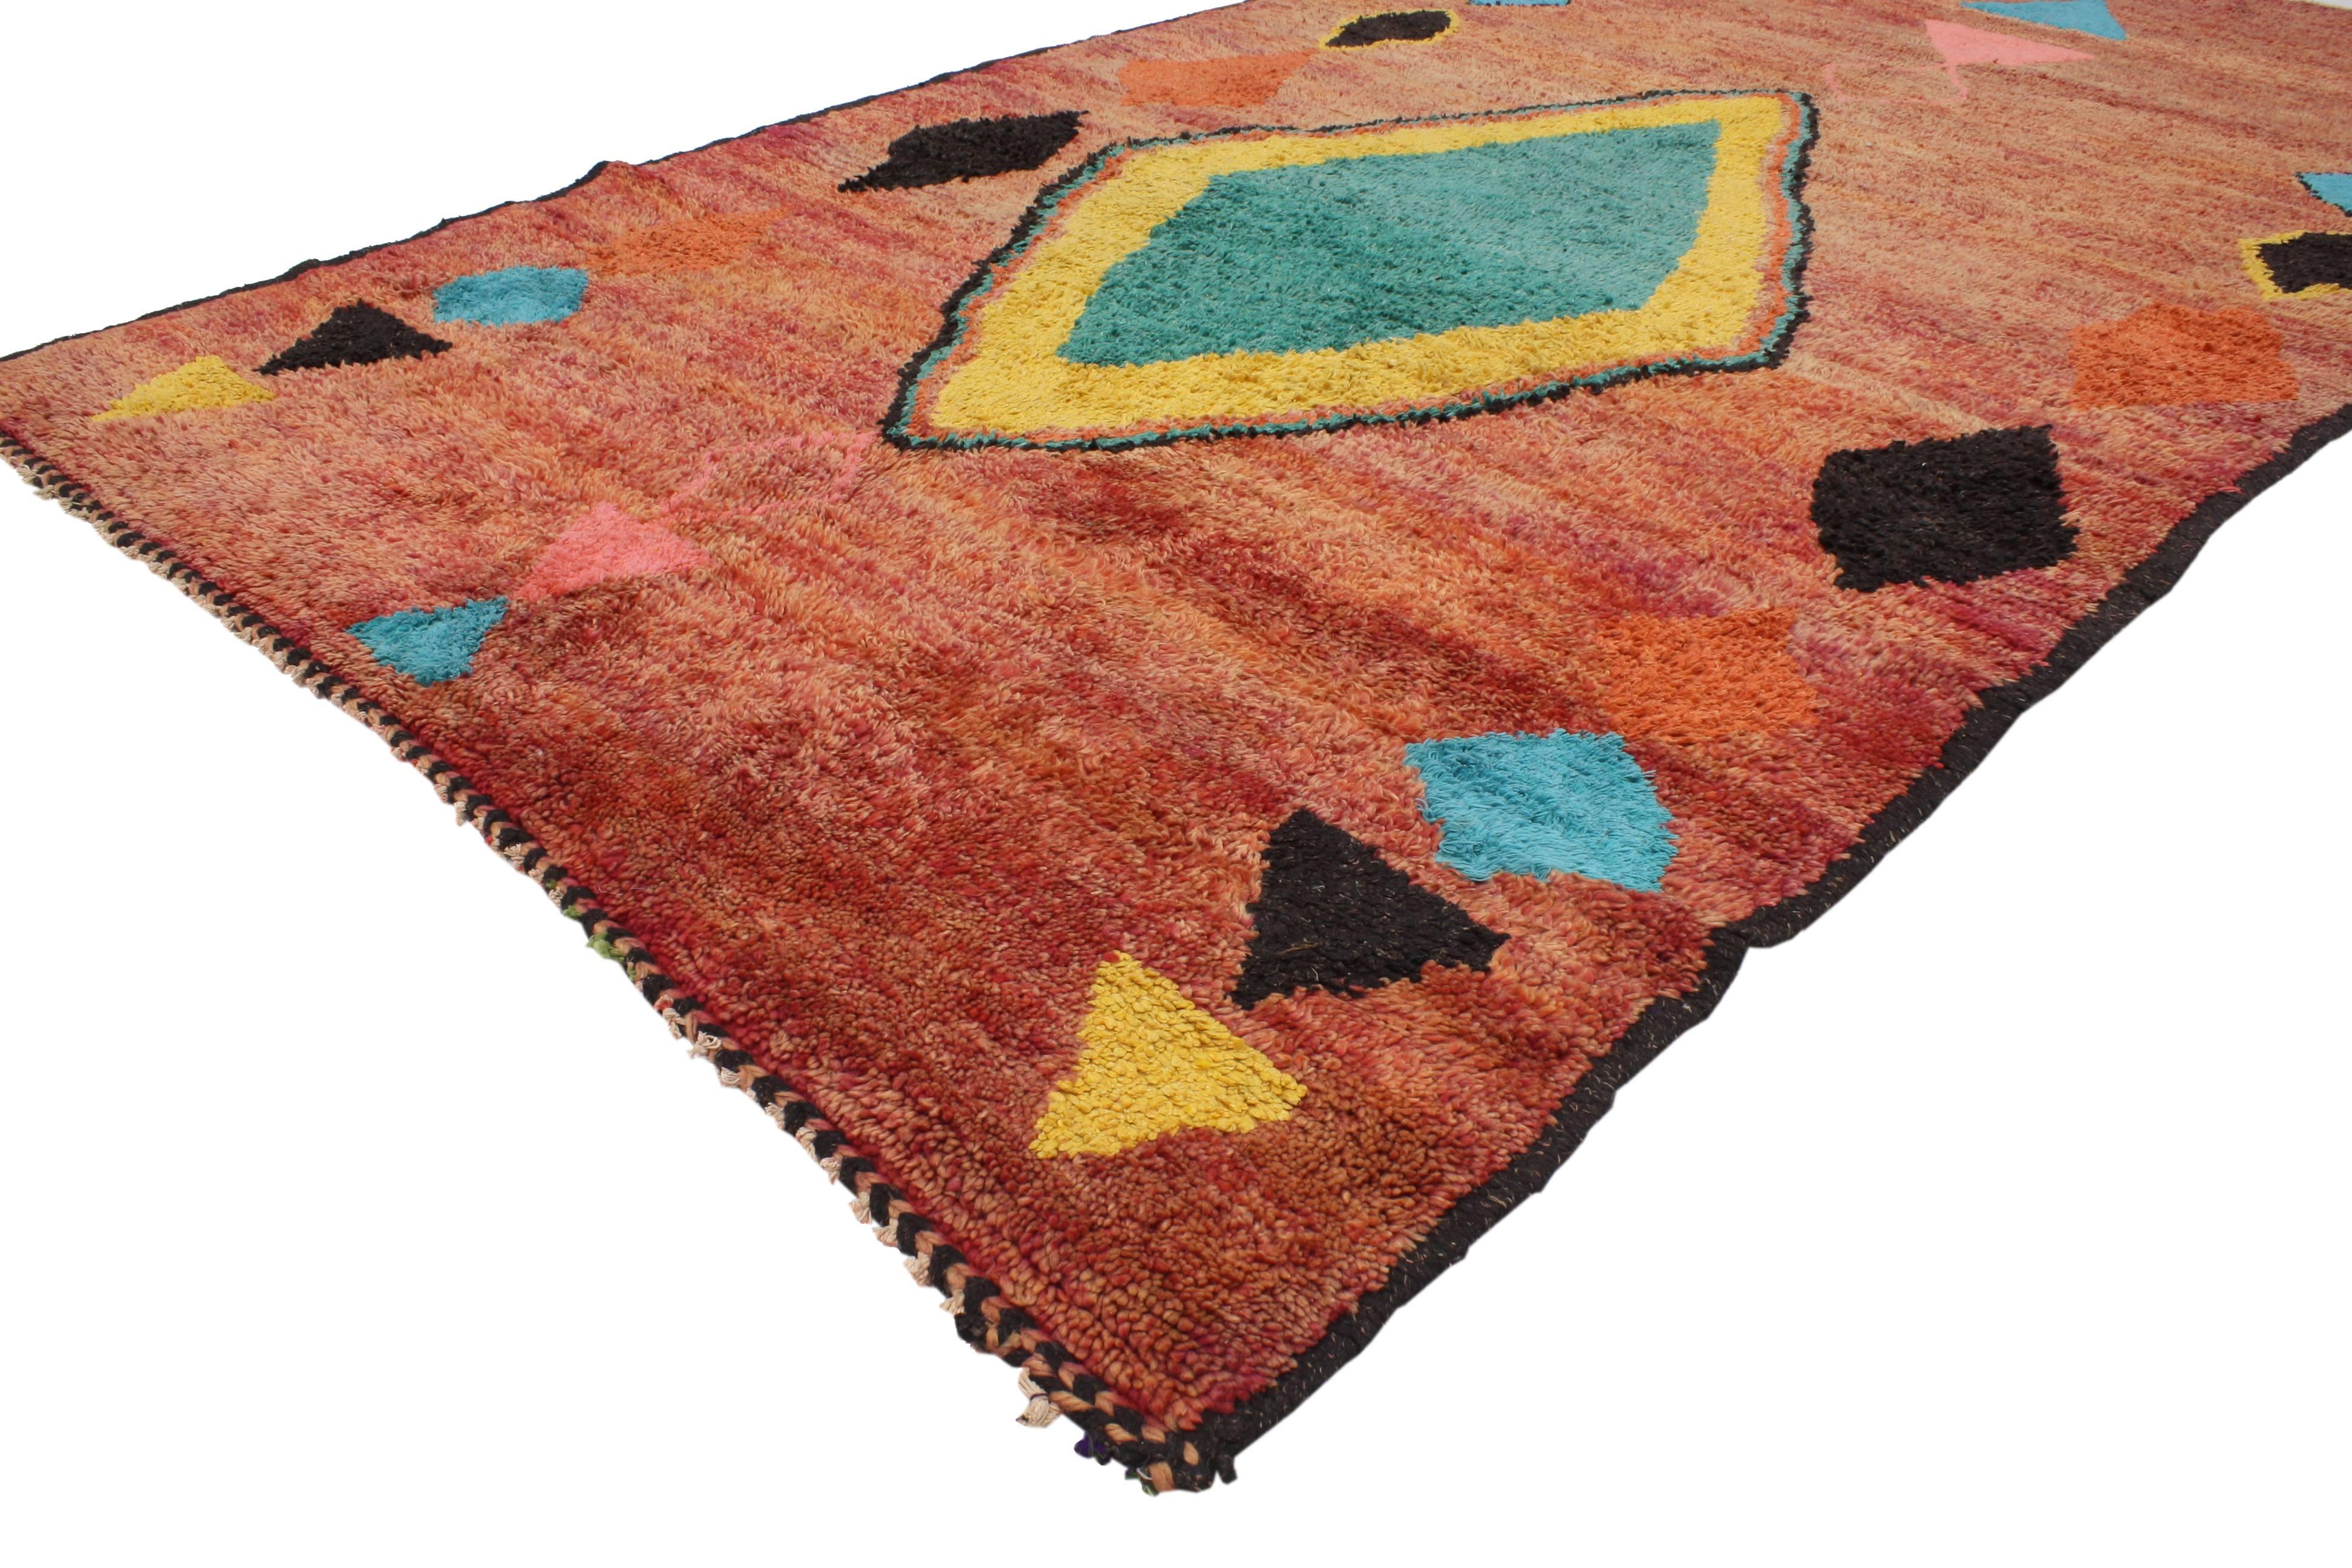 Impeccably woven from hand-knotted wool and displaying a modern tribal style, this vintage Berber Moroccan rug features a large diamond medallion surrounded by triangles, diamonds and other geometric motifs in an abrashed rustic red field. Blending